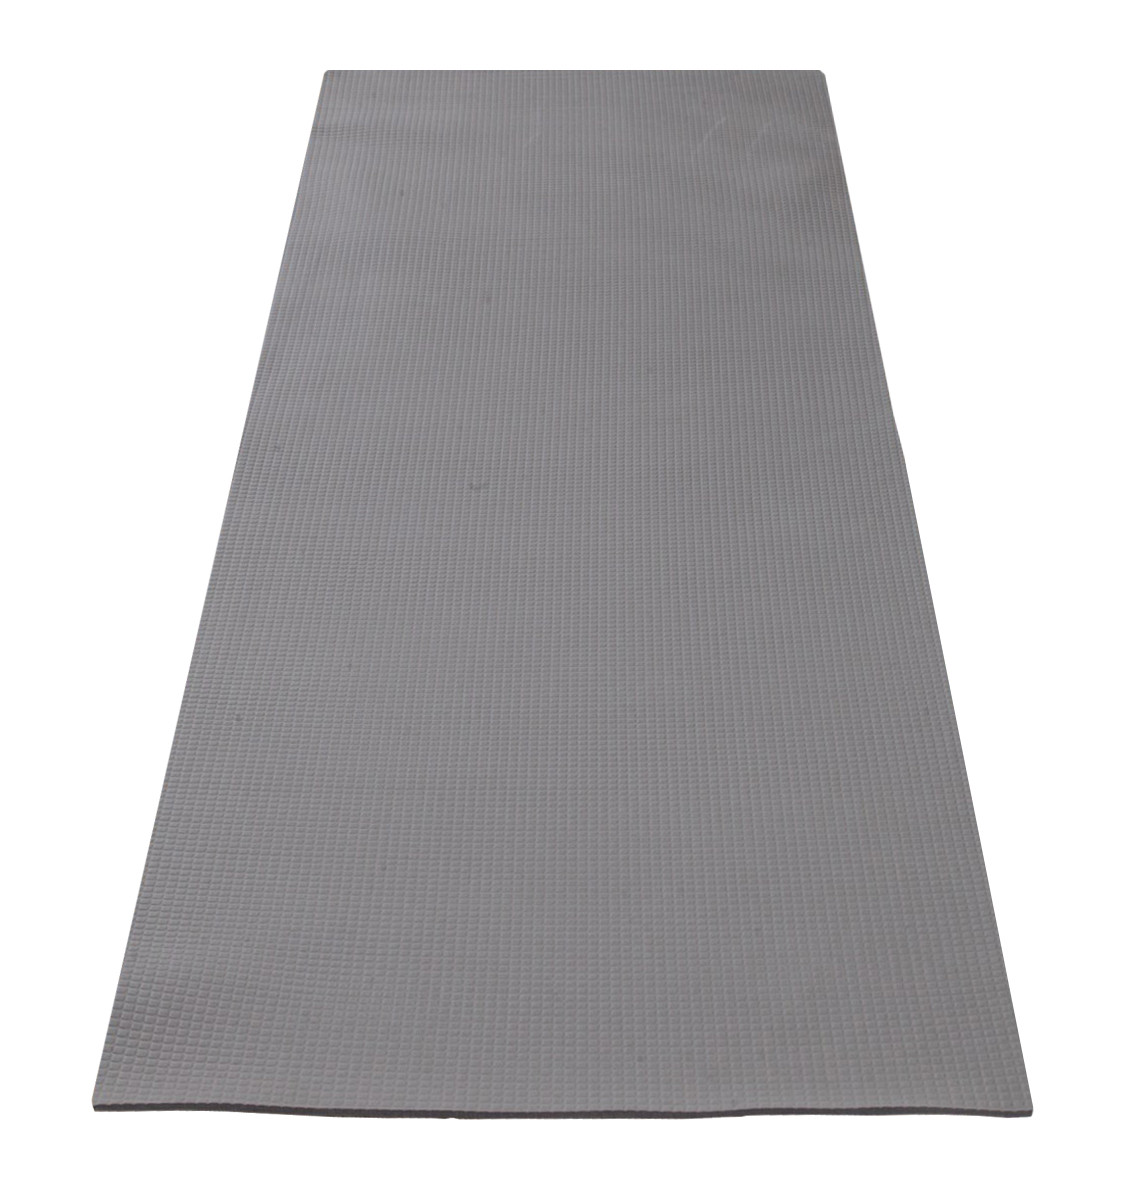 Kuber Industries 4 MM Extra Thick Yoga mat for Gym Workout and Flooring Exercise Long Size Yoga Mat for Men and Women, 6 x 2 Feet (Grey)-33_S_KUBQMART11578